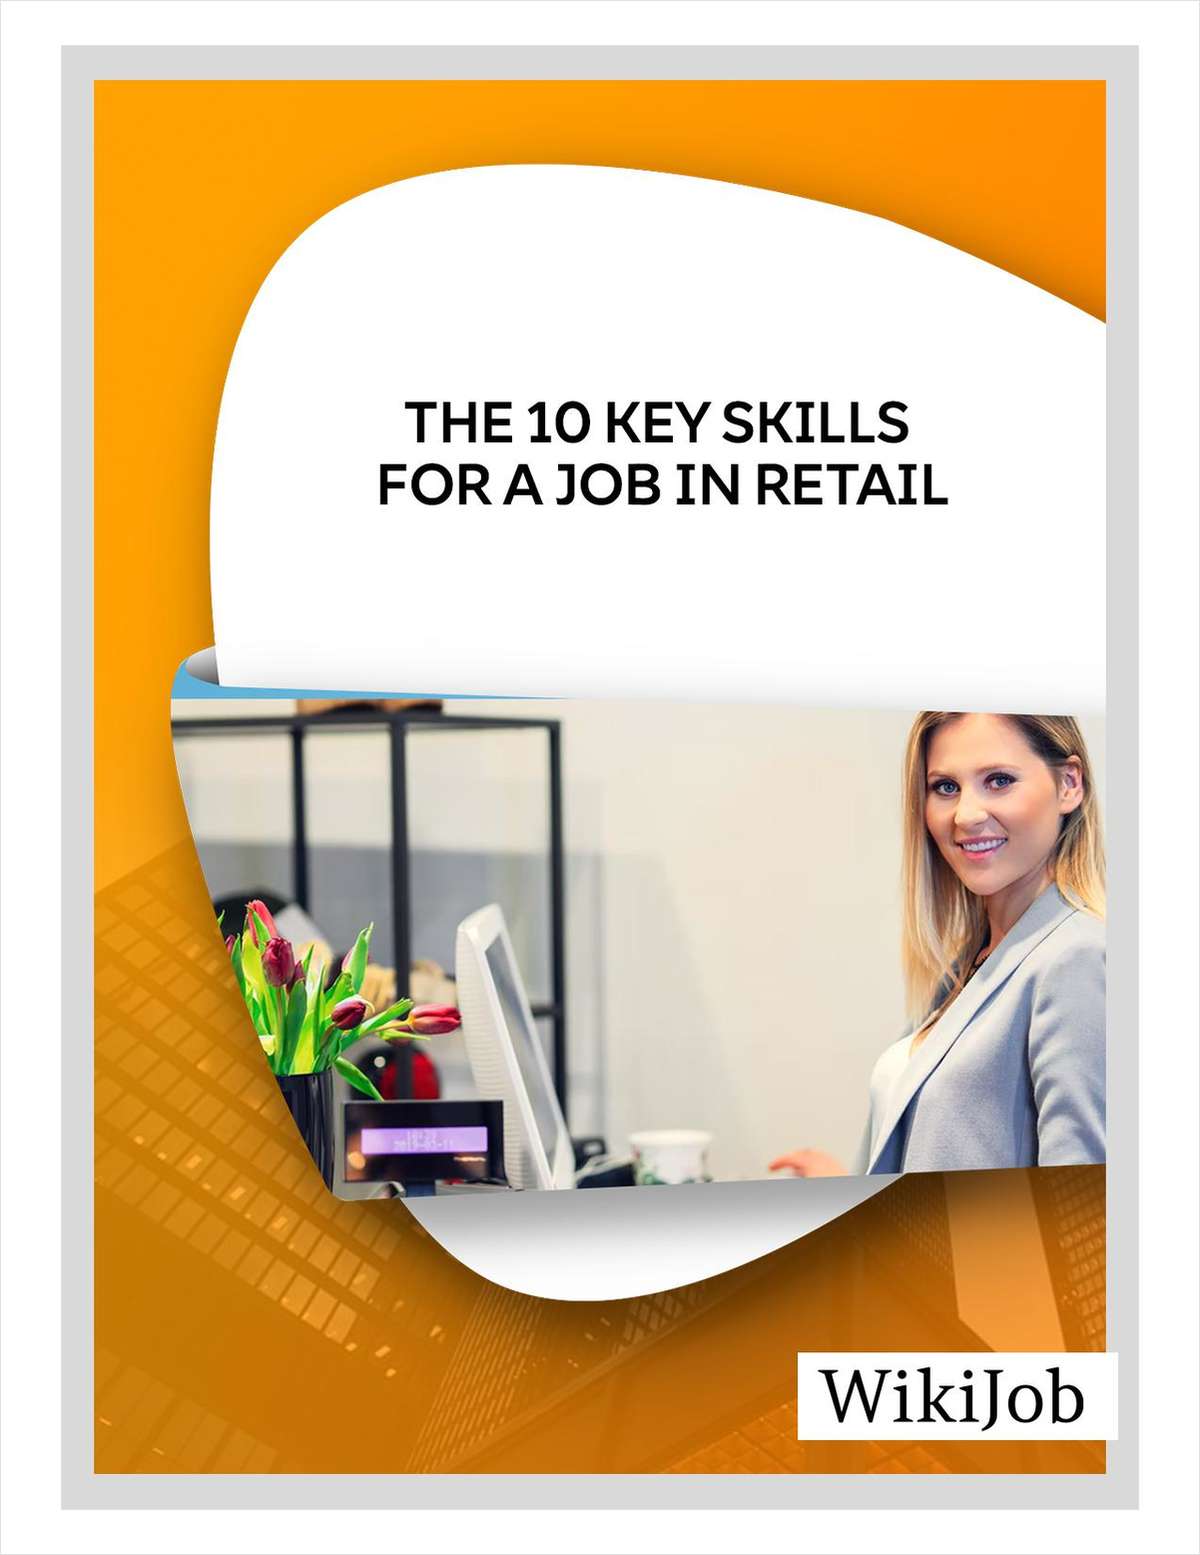 The 10 Key Skills for a Job in Retail